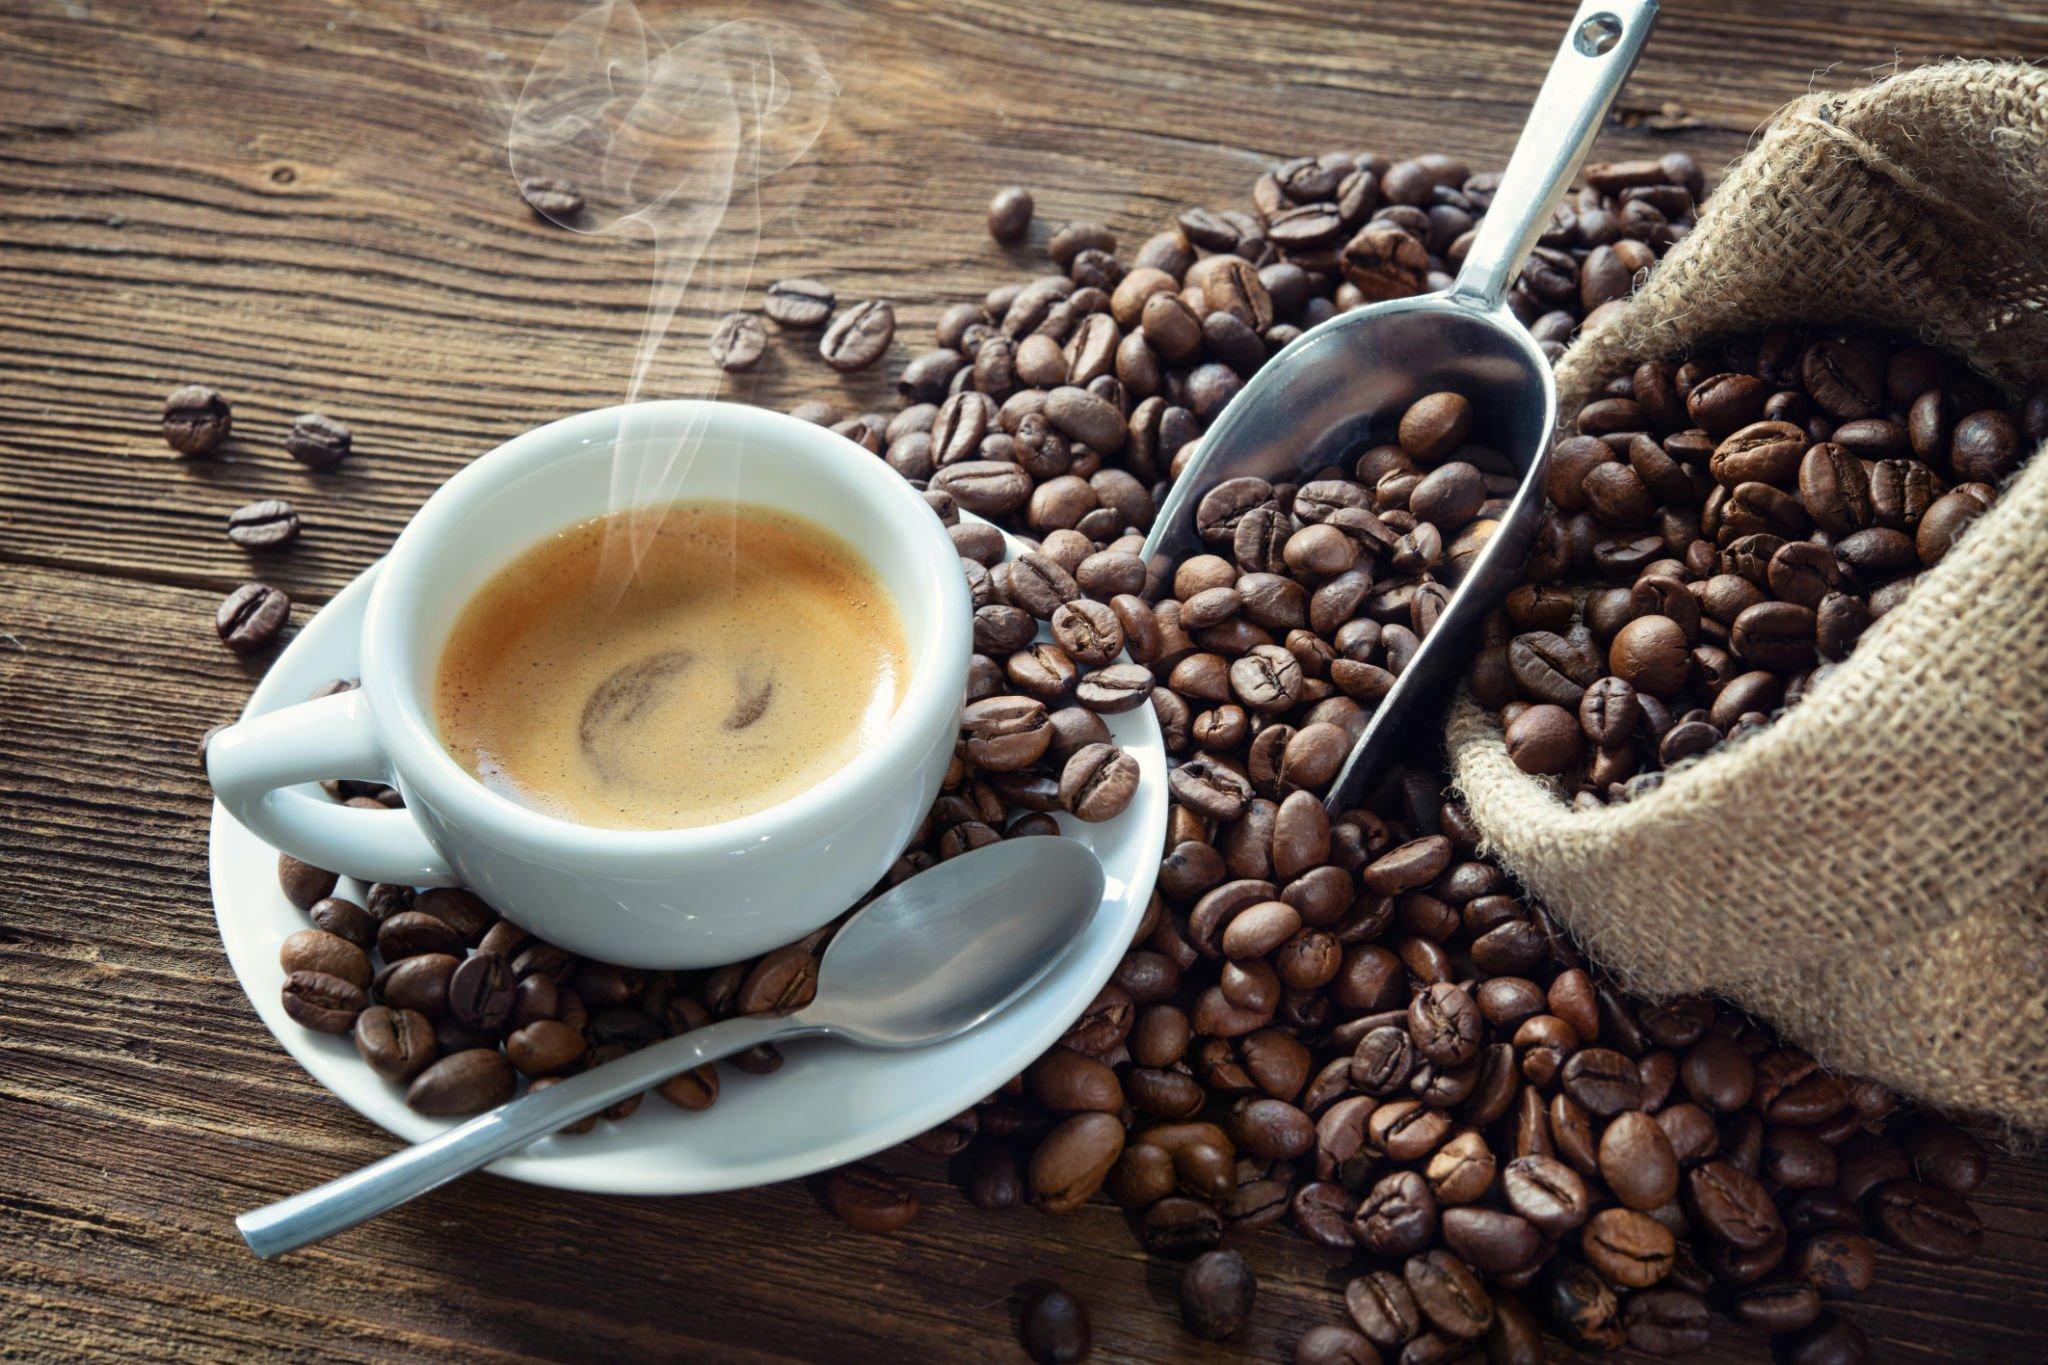 Does Coffee Have Potassium? Uncover the Surprising Facts About Coffee & Potassium